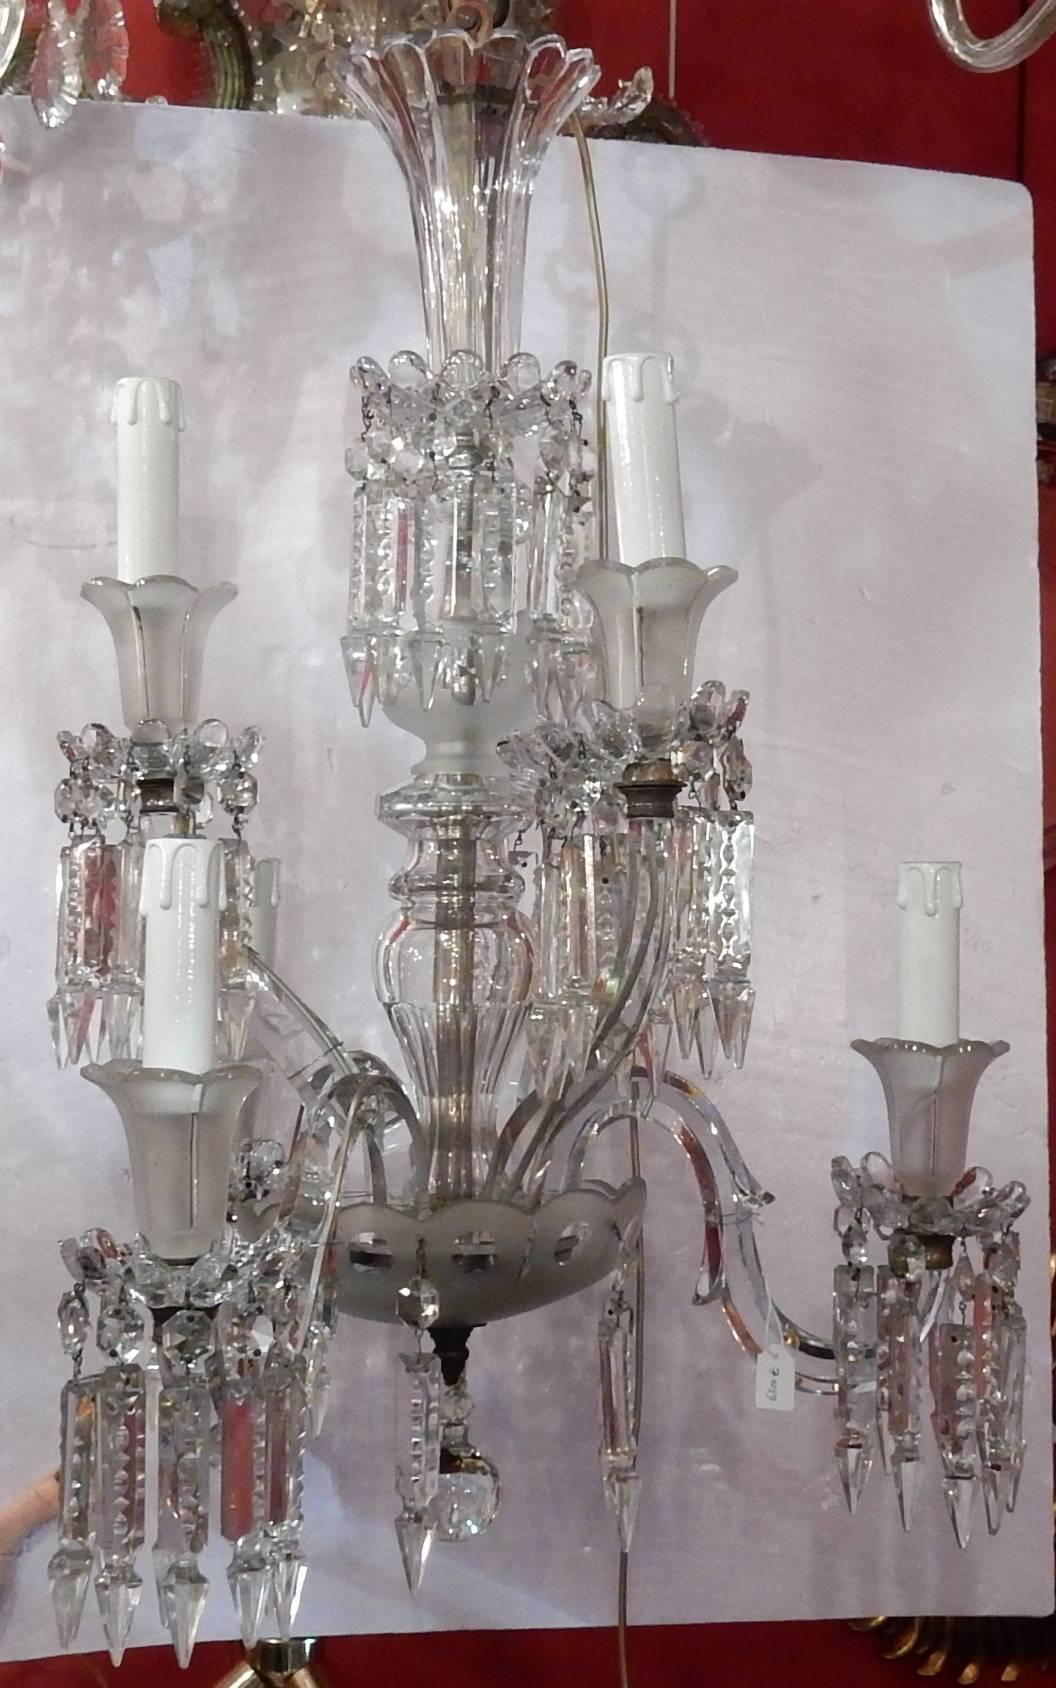 Chandelier Crystal Baccarat  ;  ; prism with spikes,6 arms.
Good condition, circa 1950